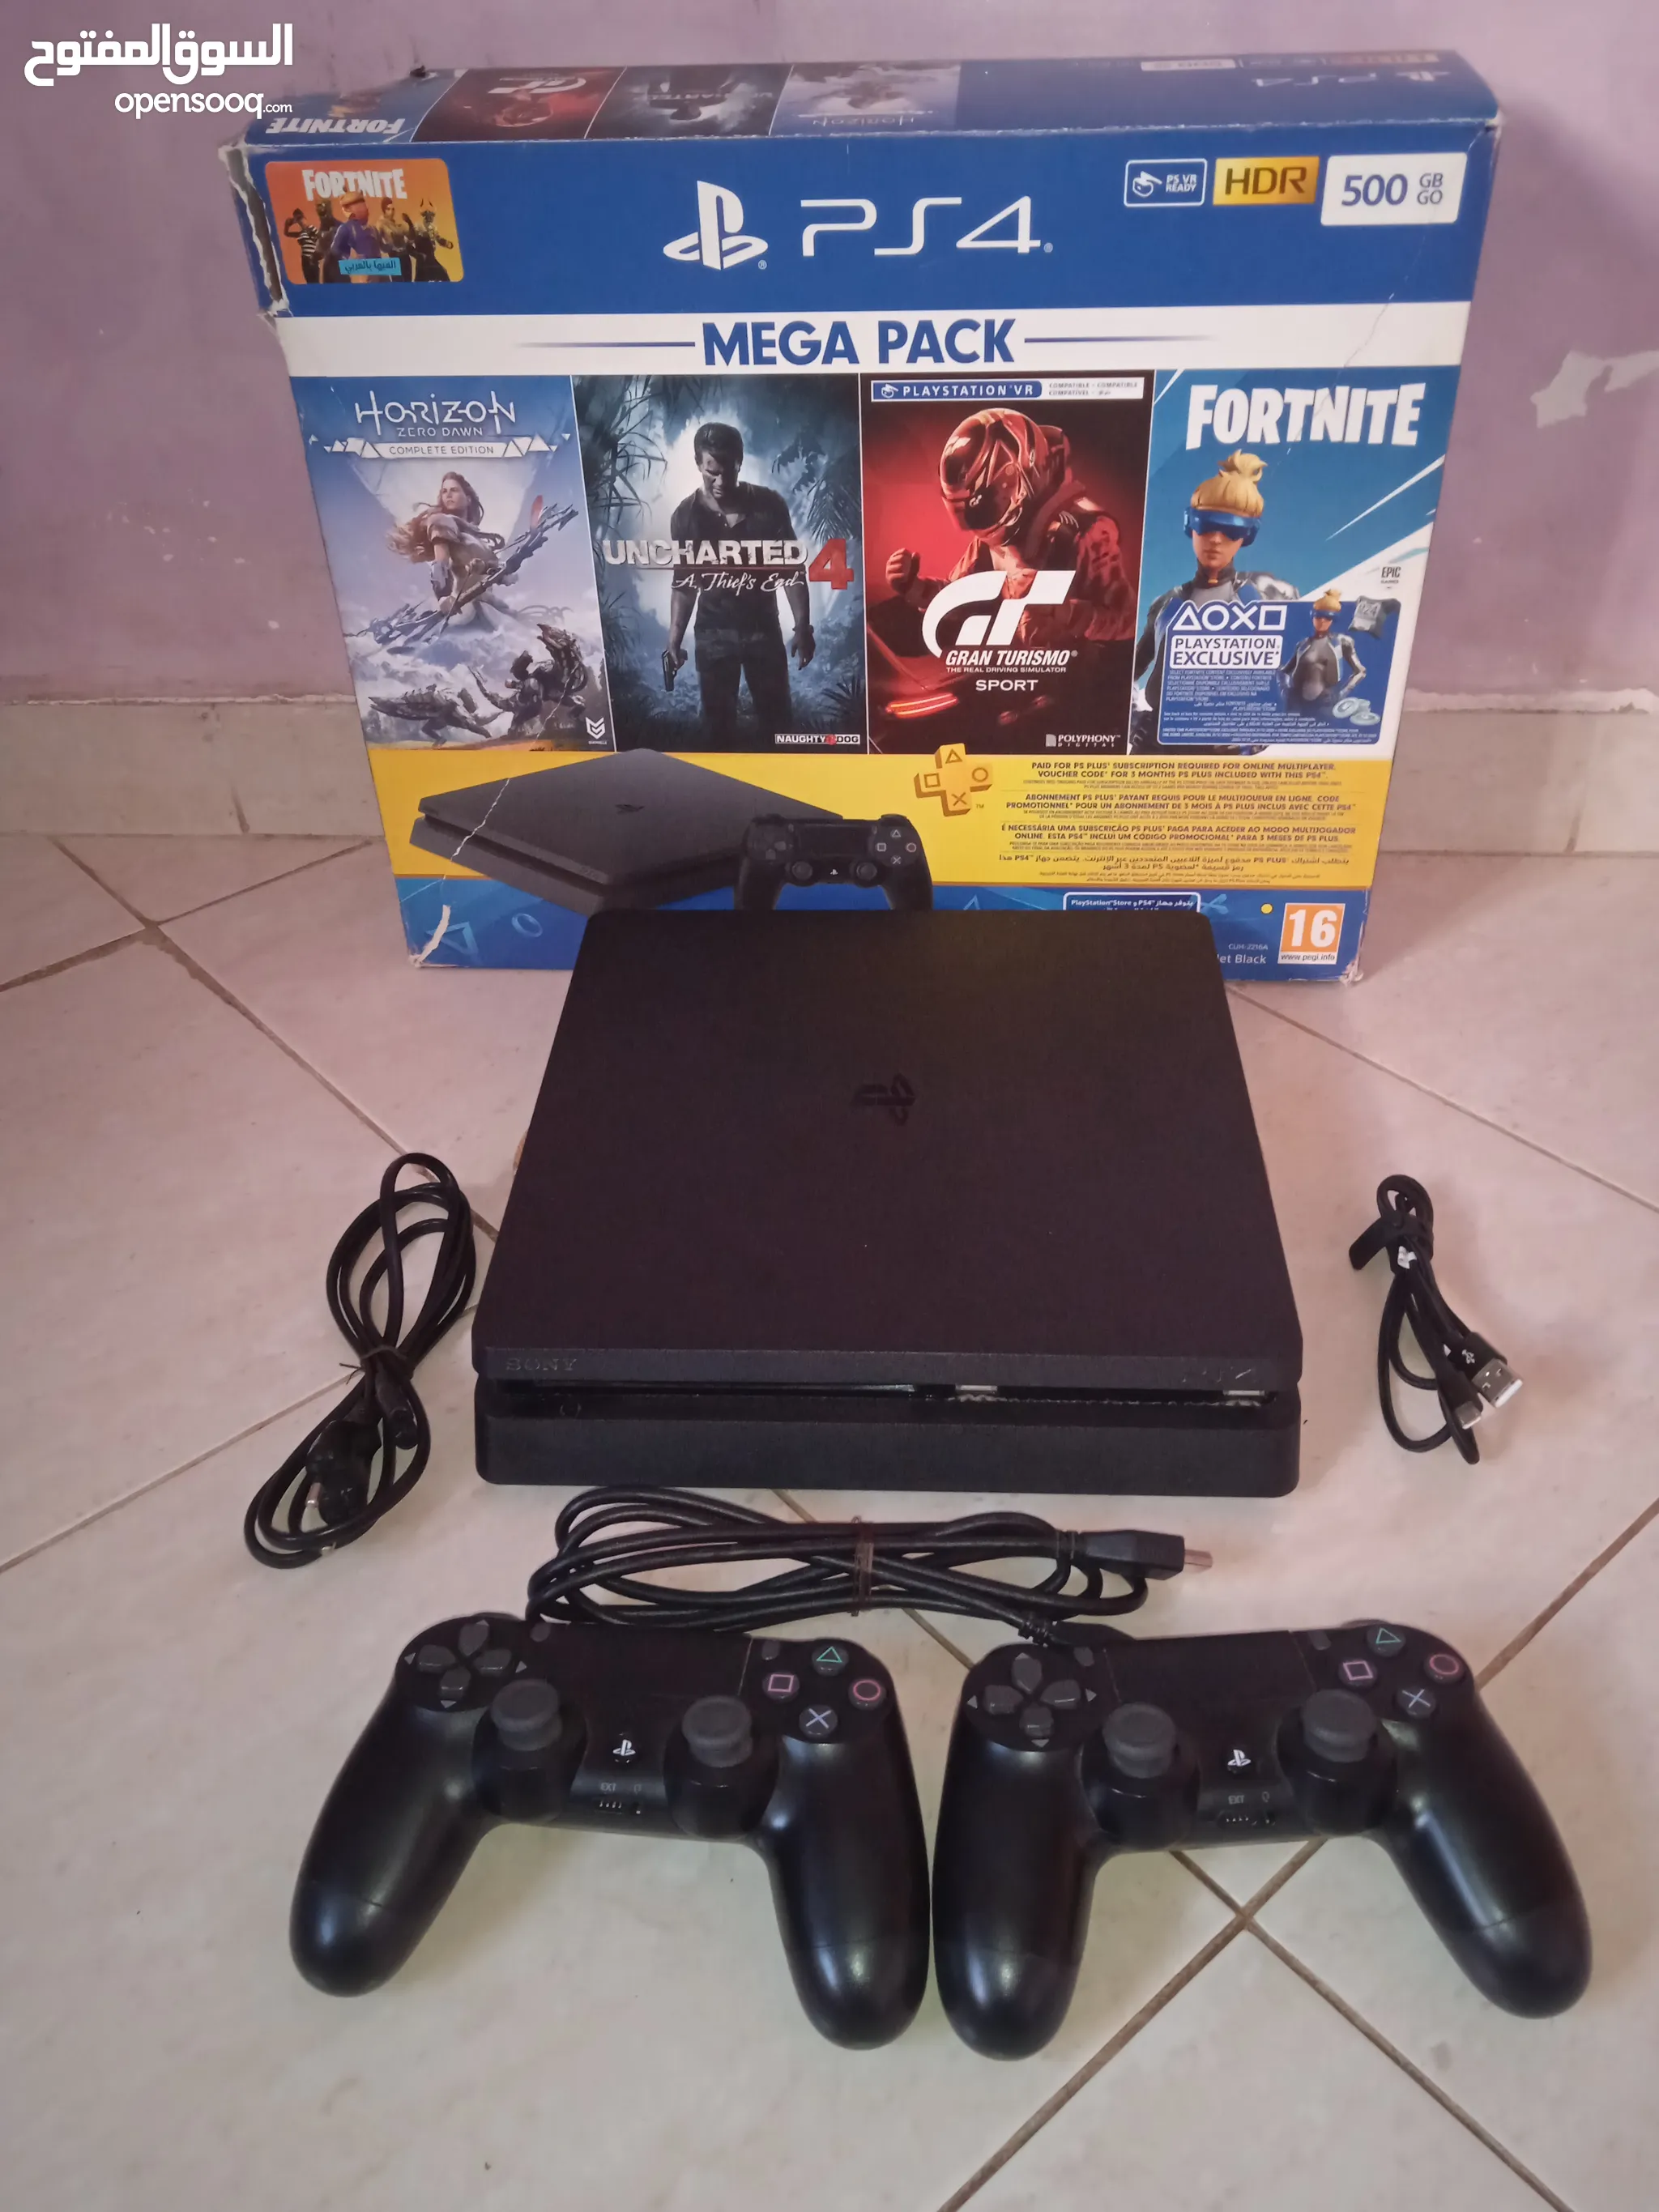 Playstation 4 For Sale in Morocco : Used : Best Prices | OpenSooq